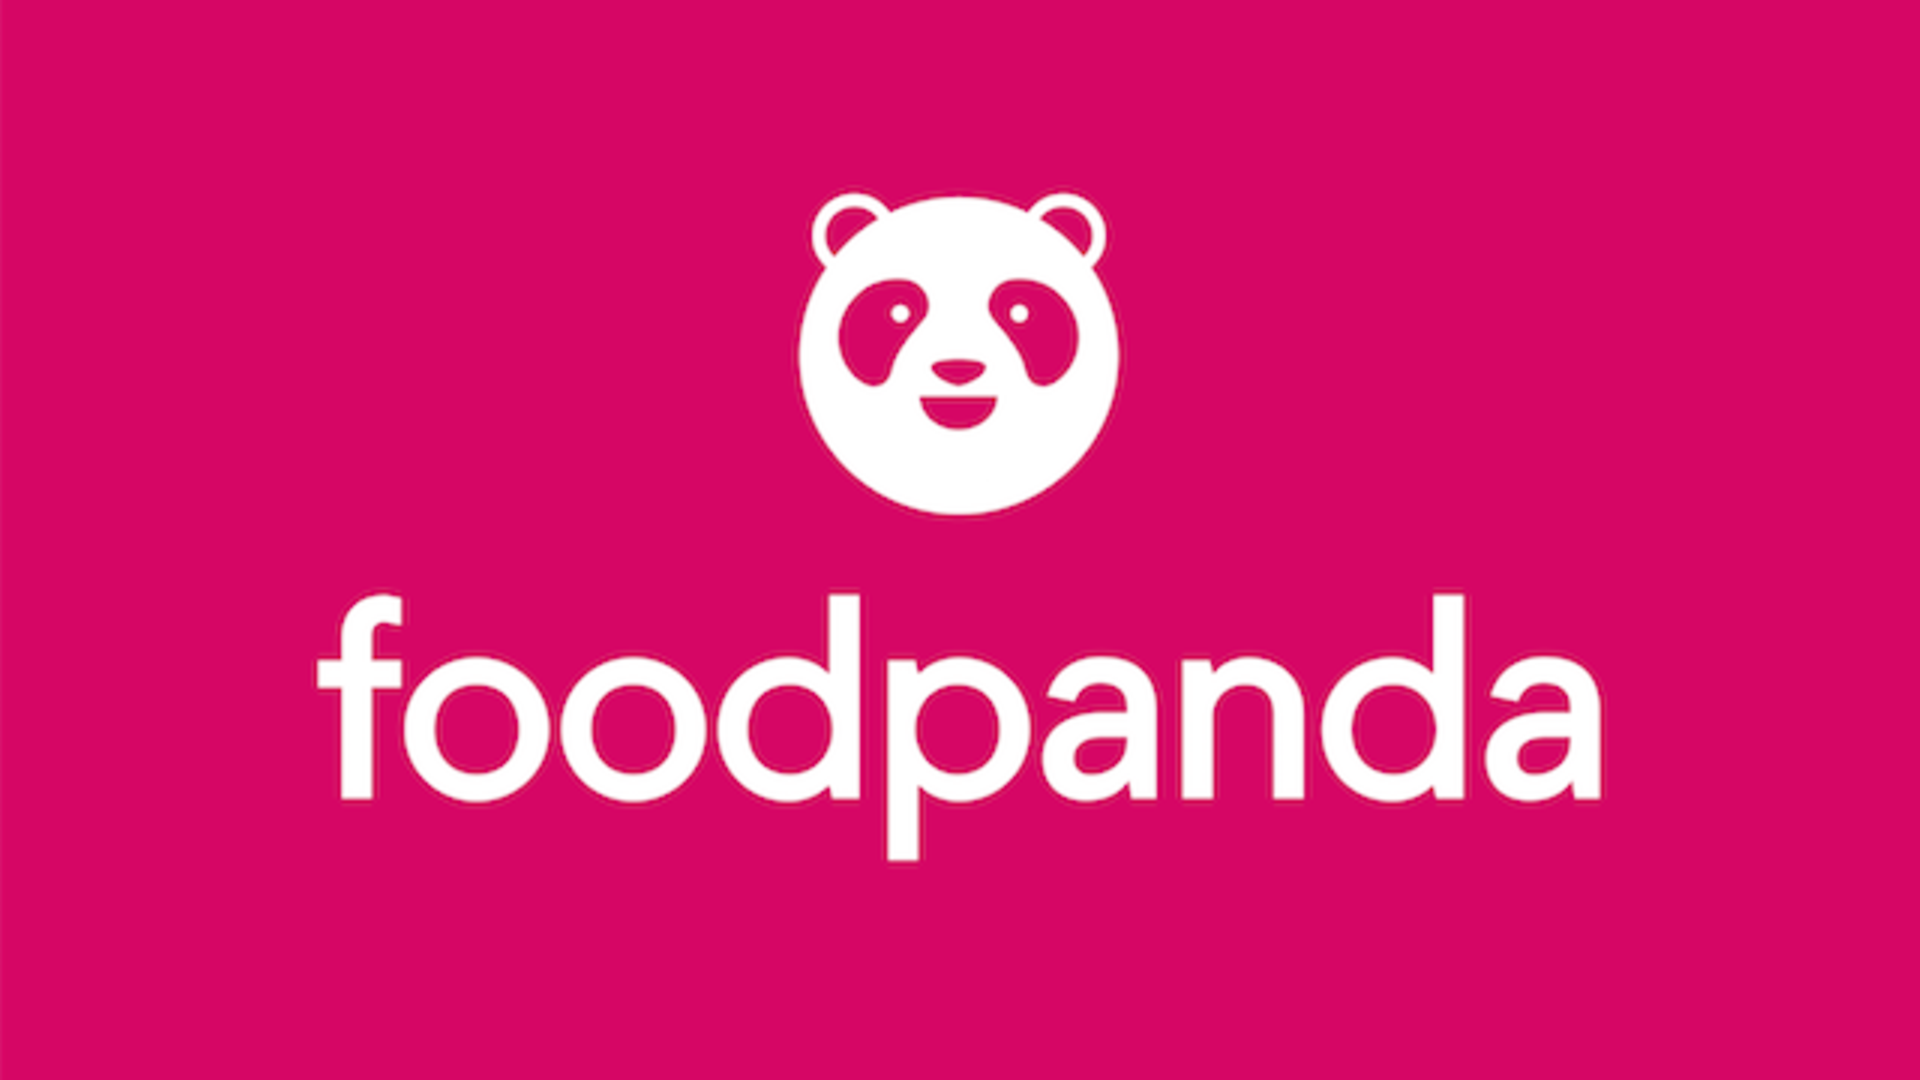 21 foodpanda promo codes for use in the month of September 2021